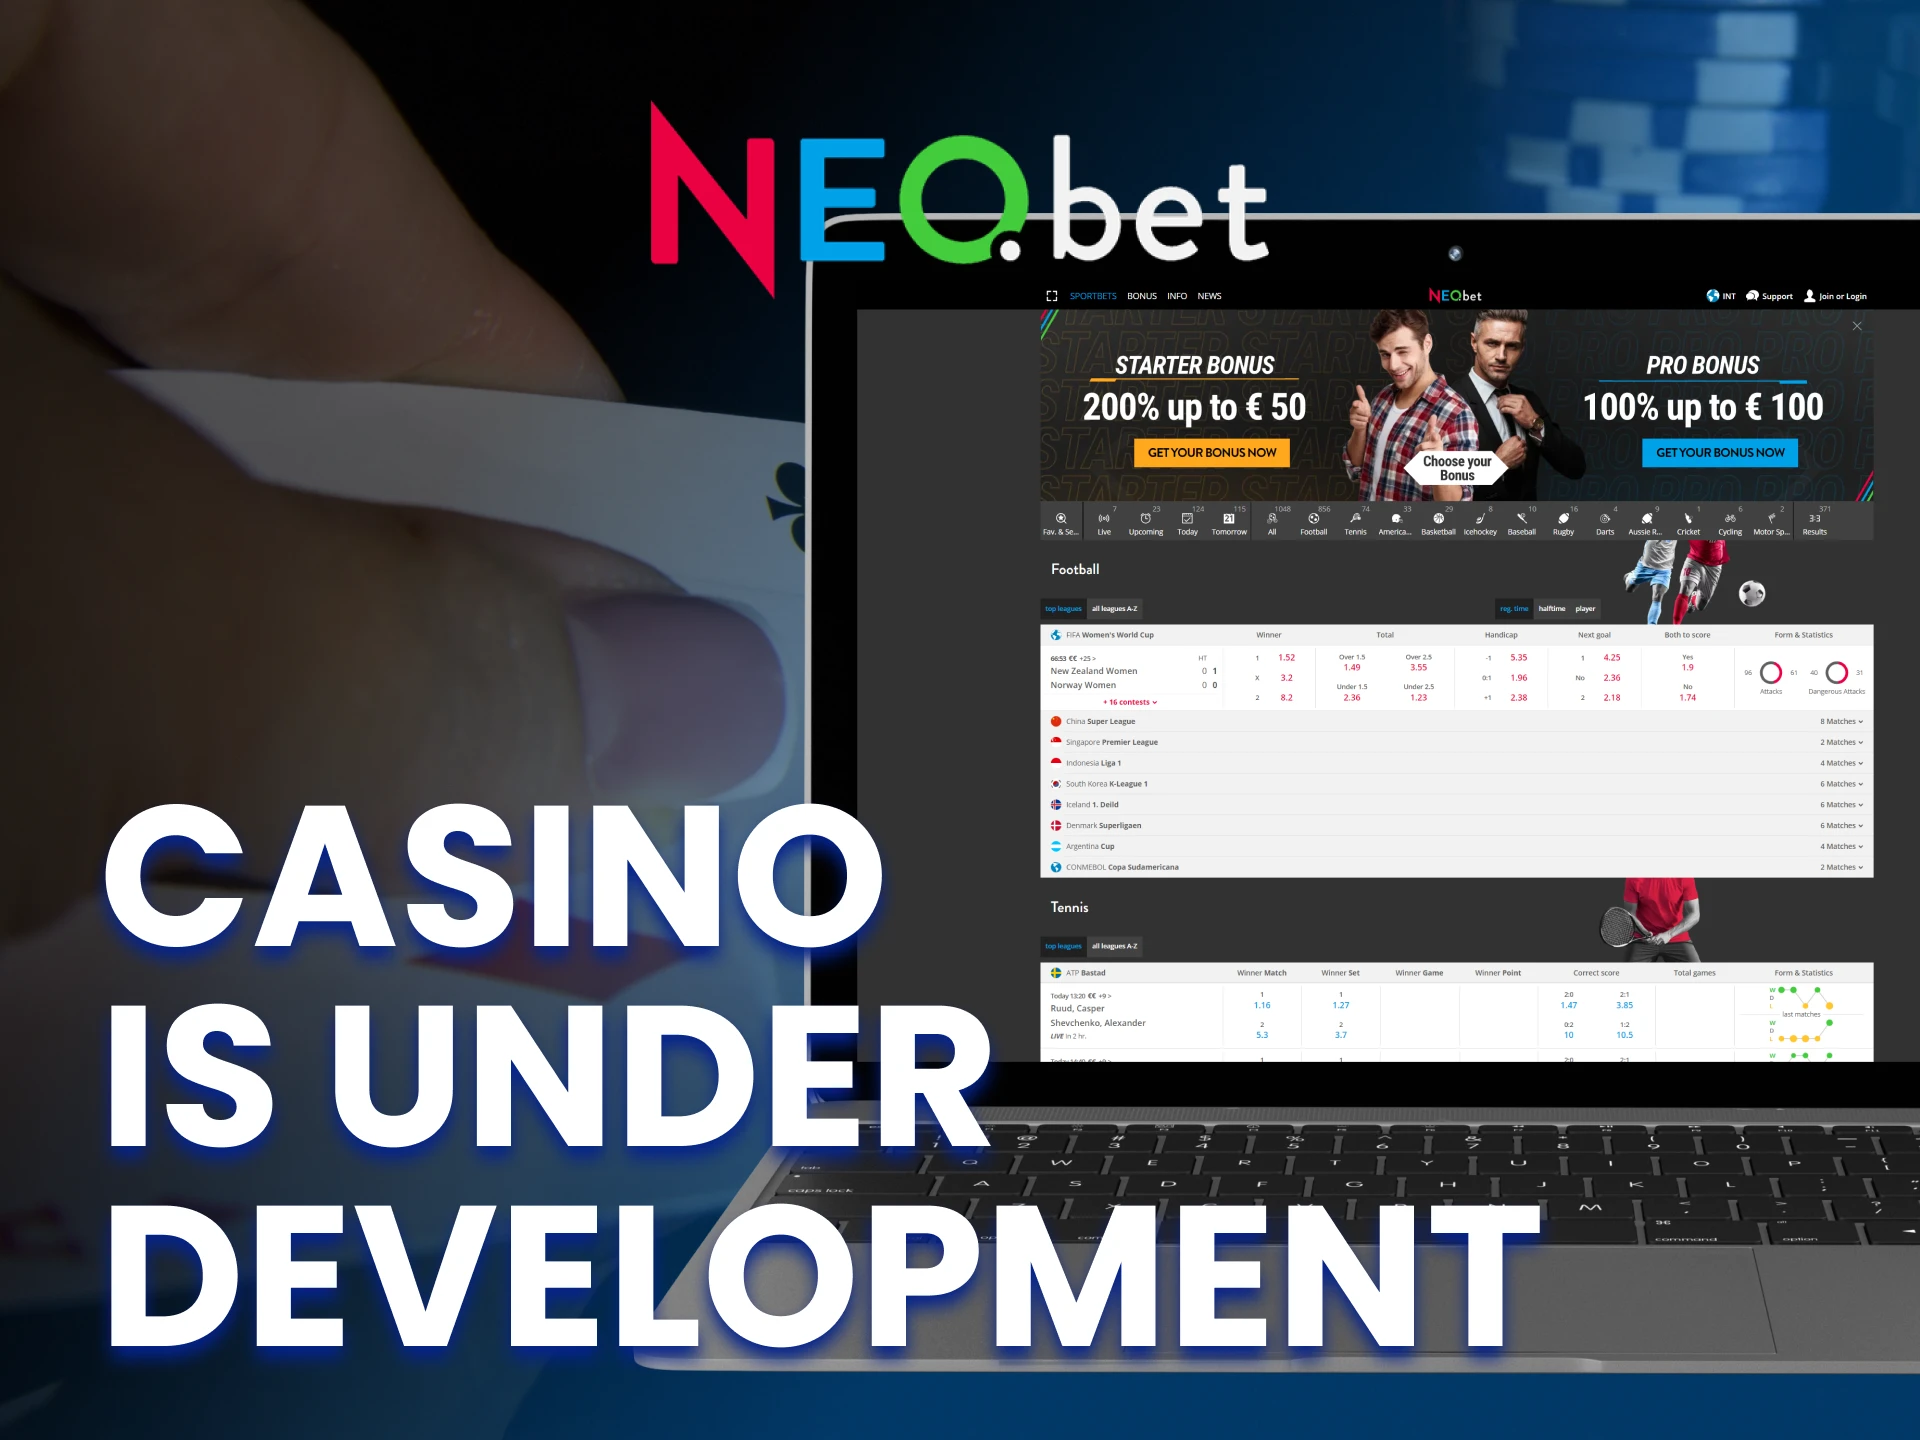 Play at the online casino with NEO.bet soon.